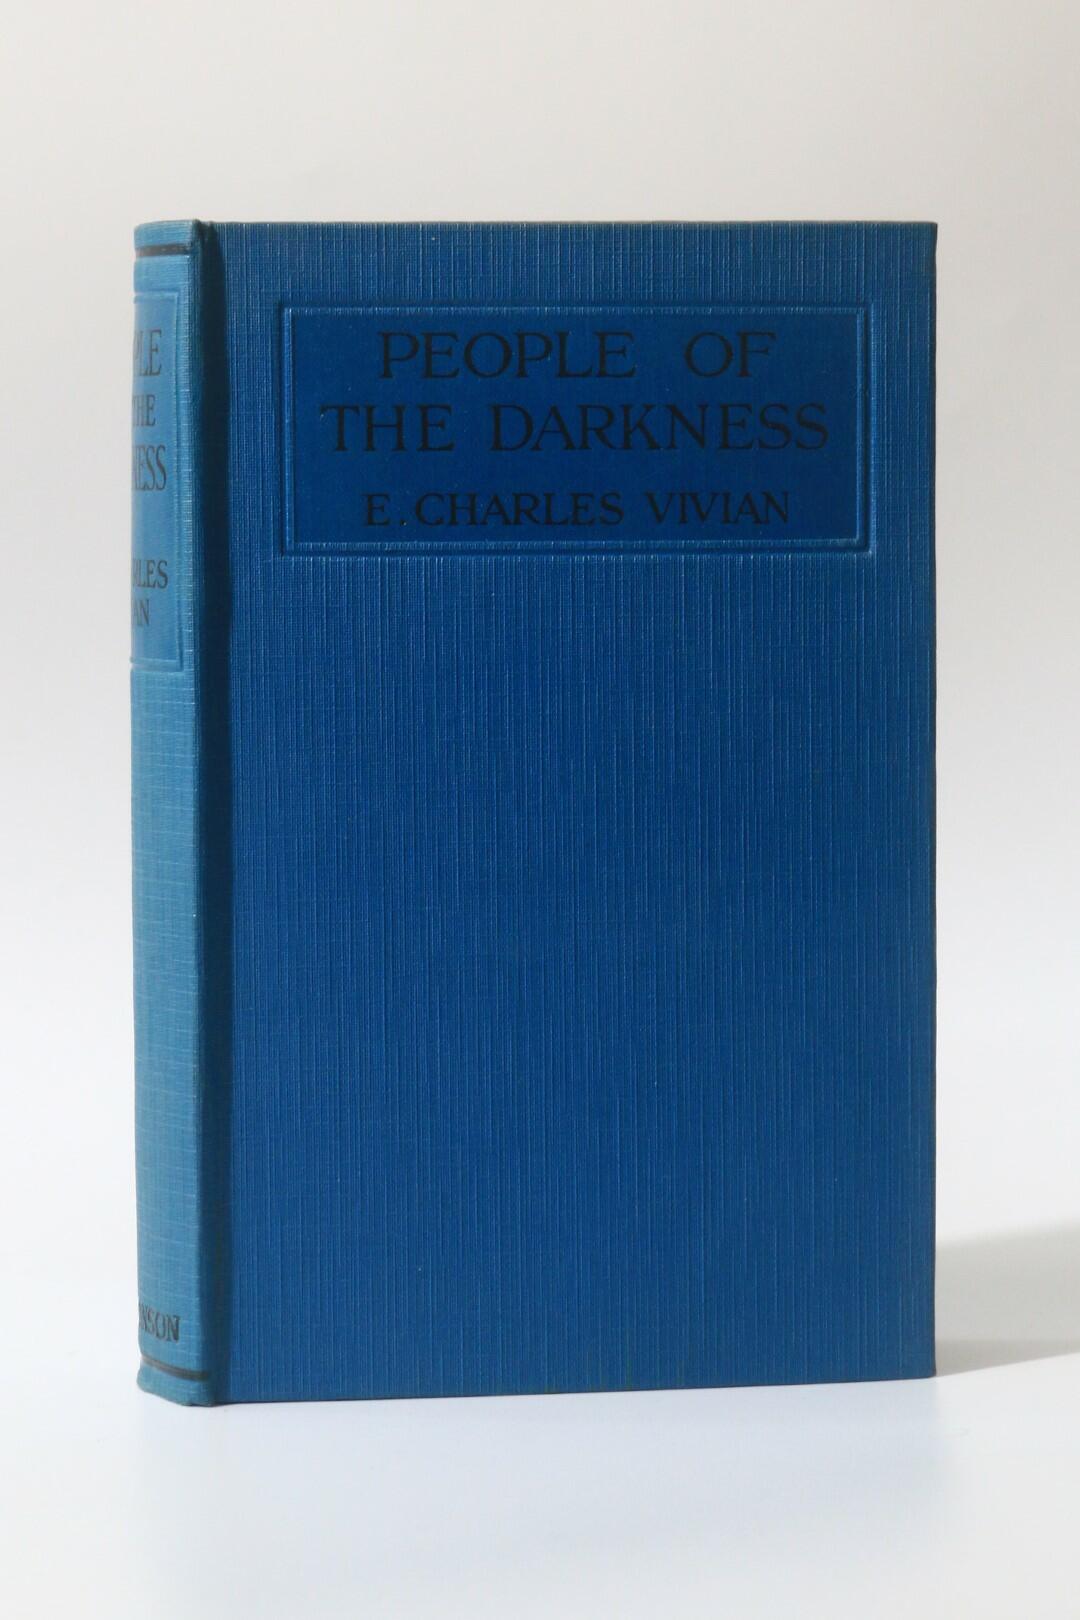 E. Charles Vivian - People of the Darkness - Hutchinson, nd [1924], First Edition.